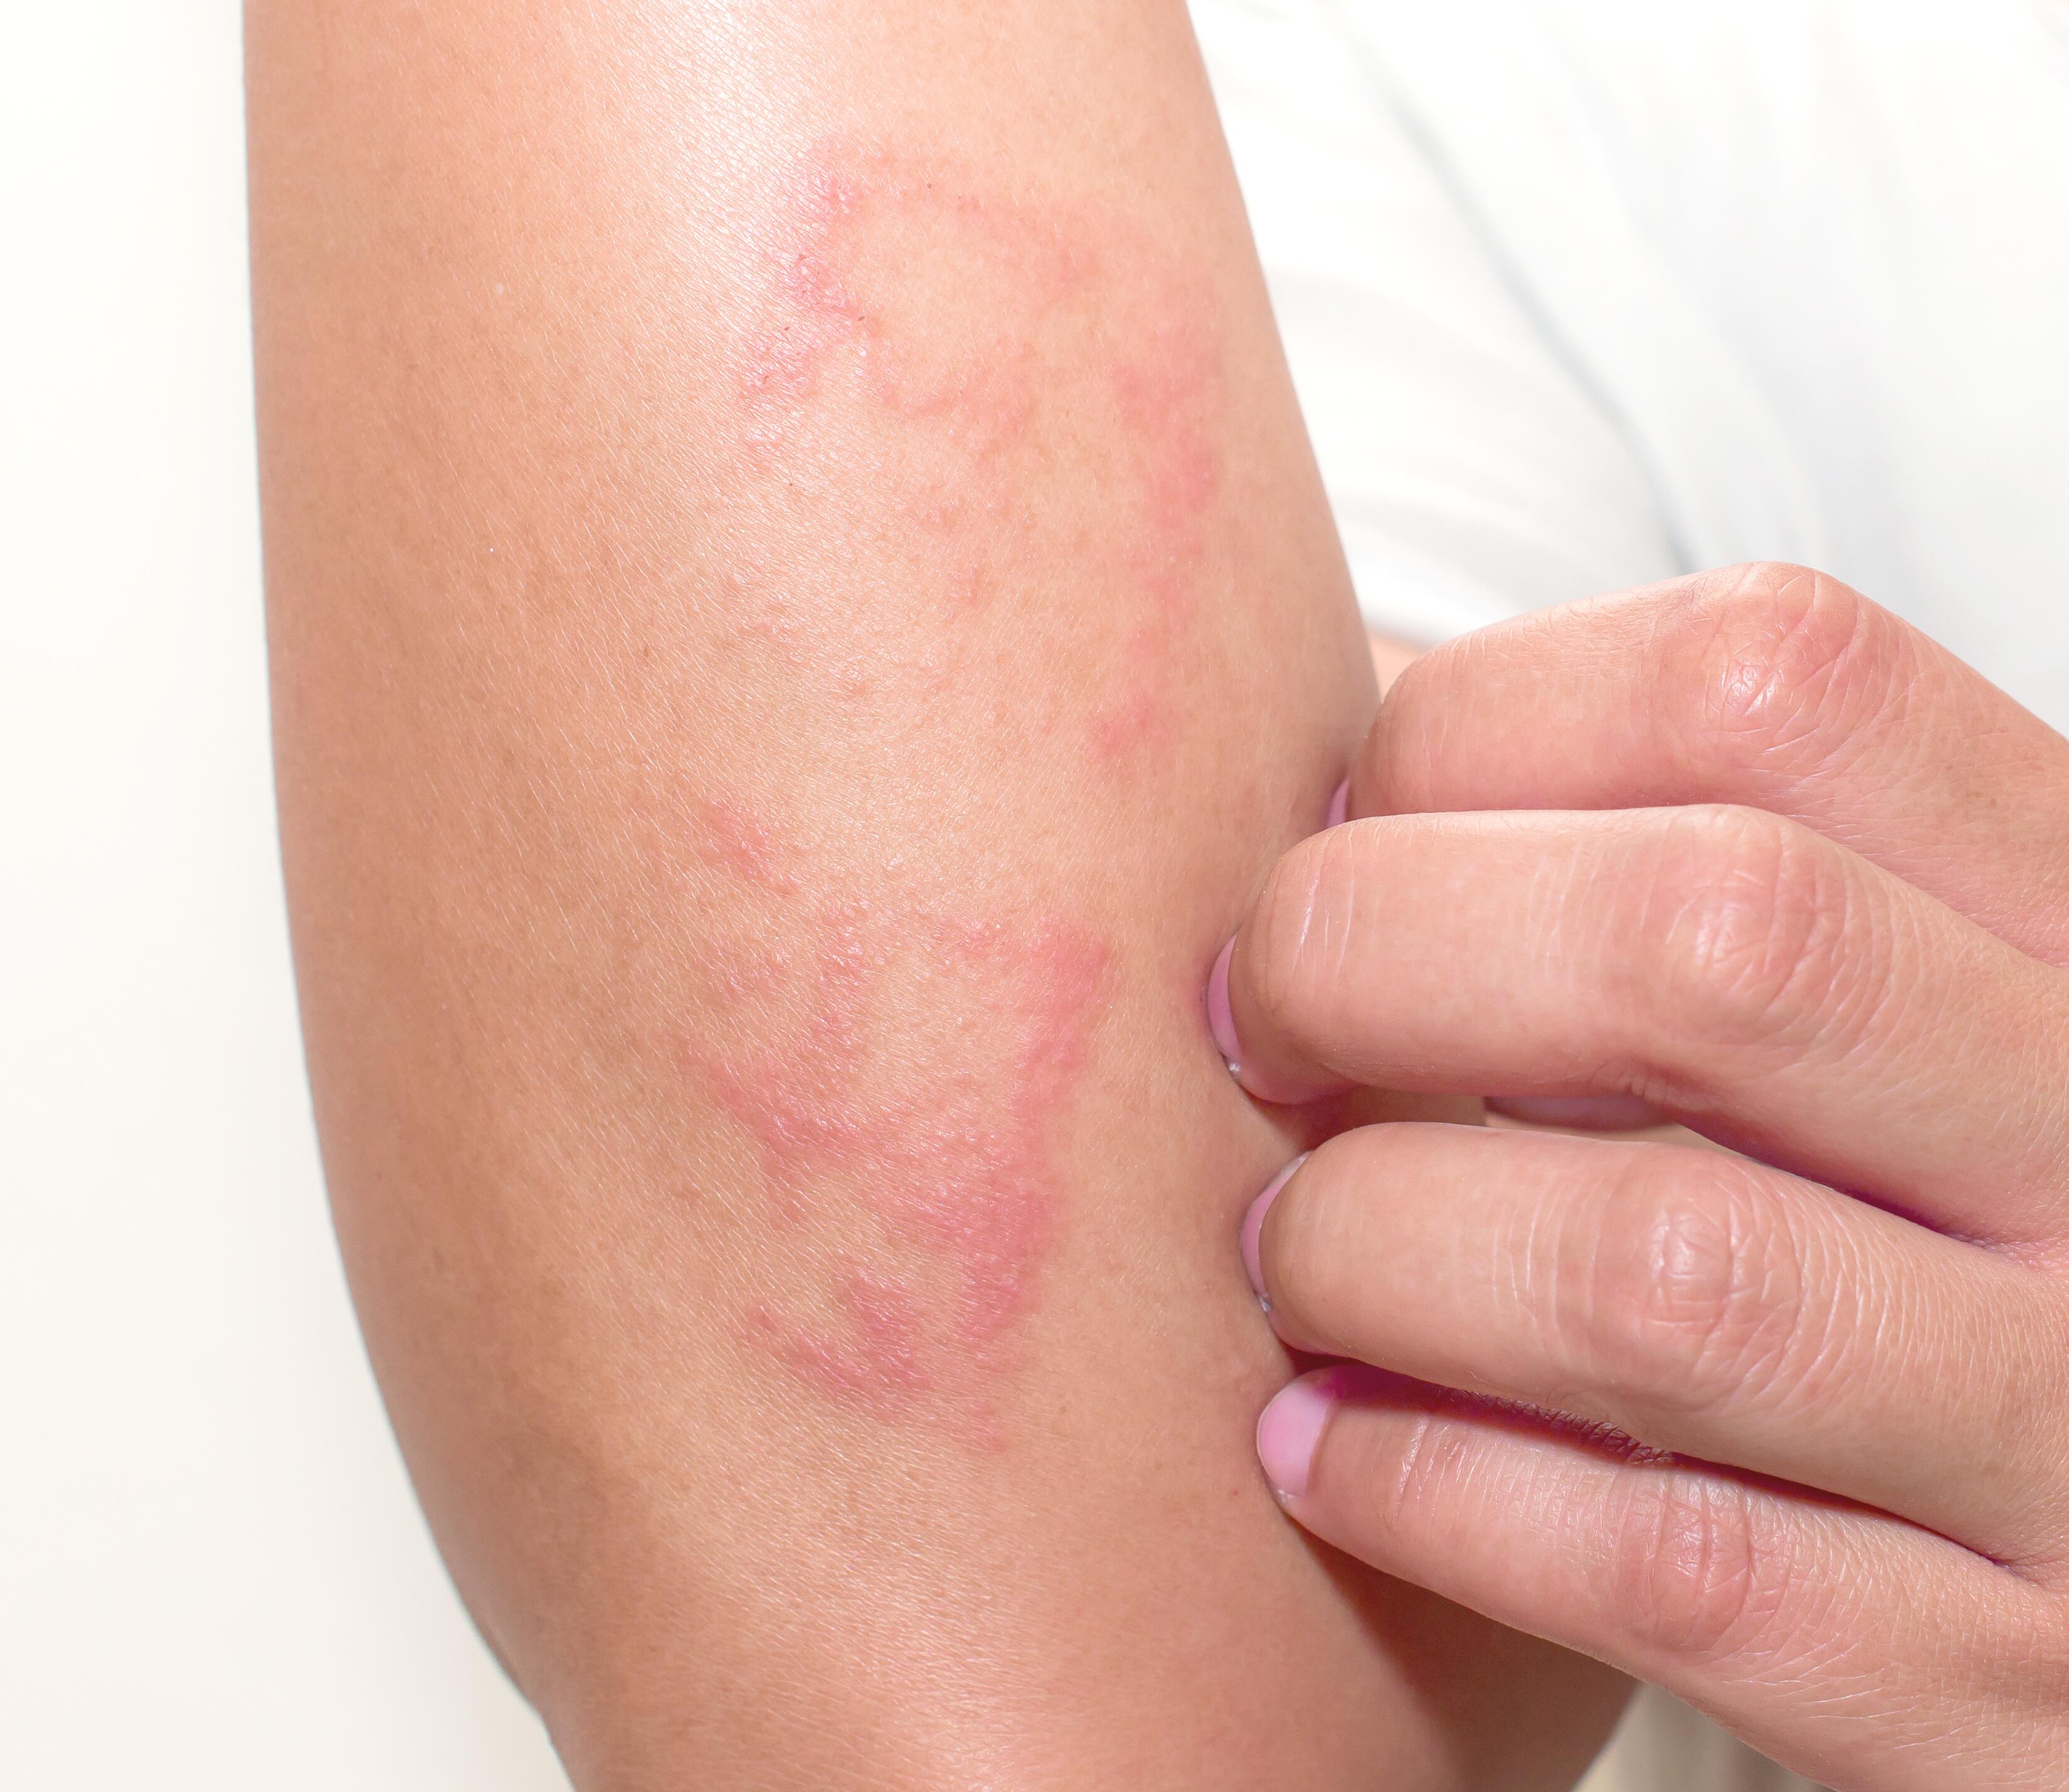 Your skin feels irritated. Okay, but what’s the cause?